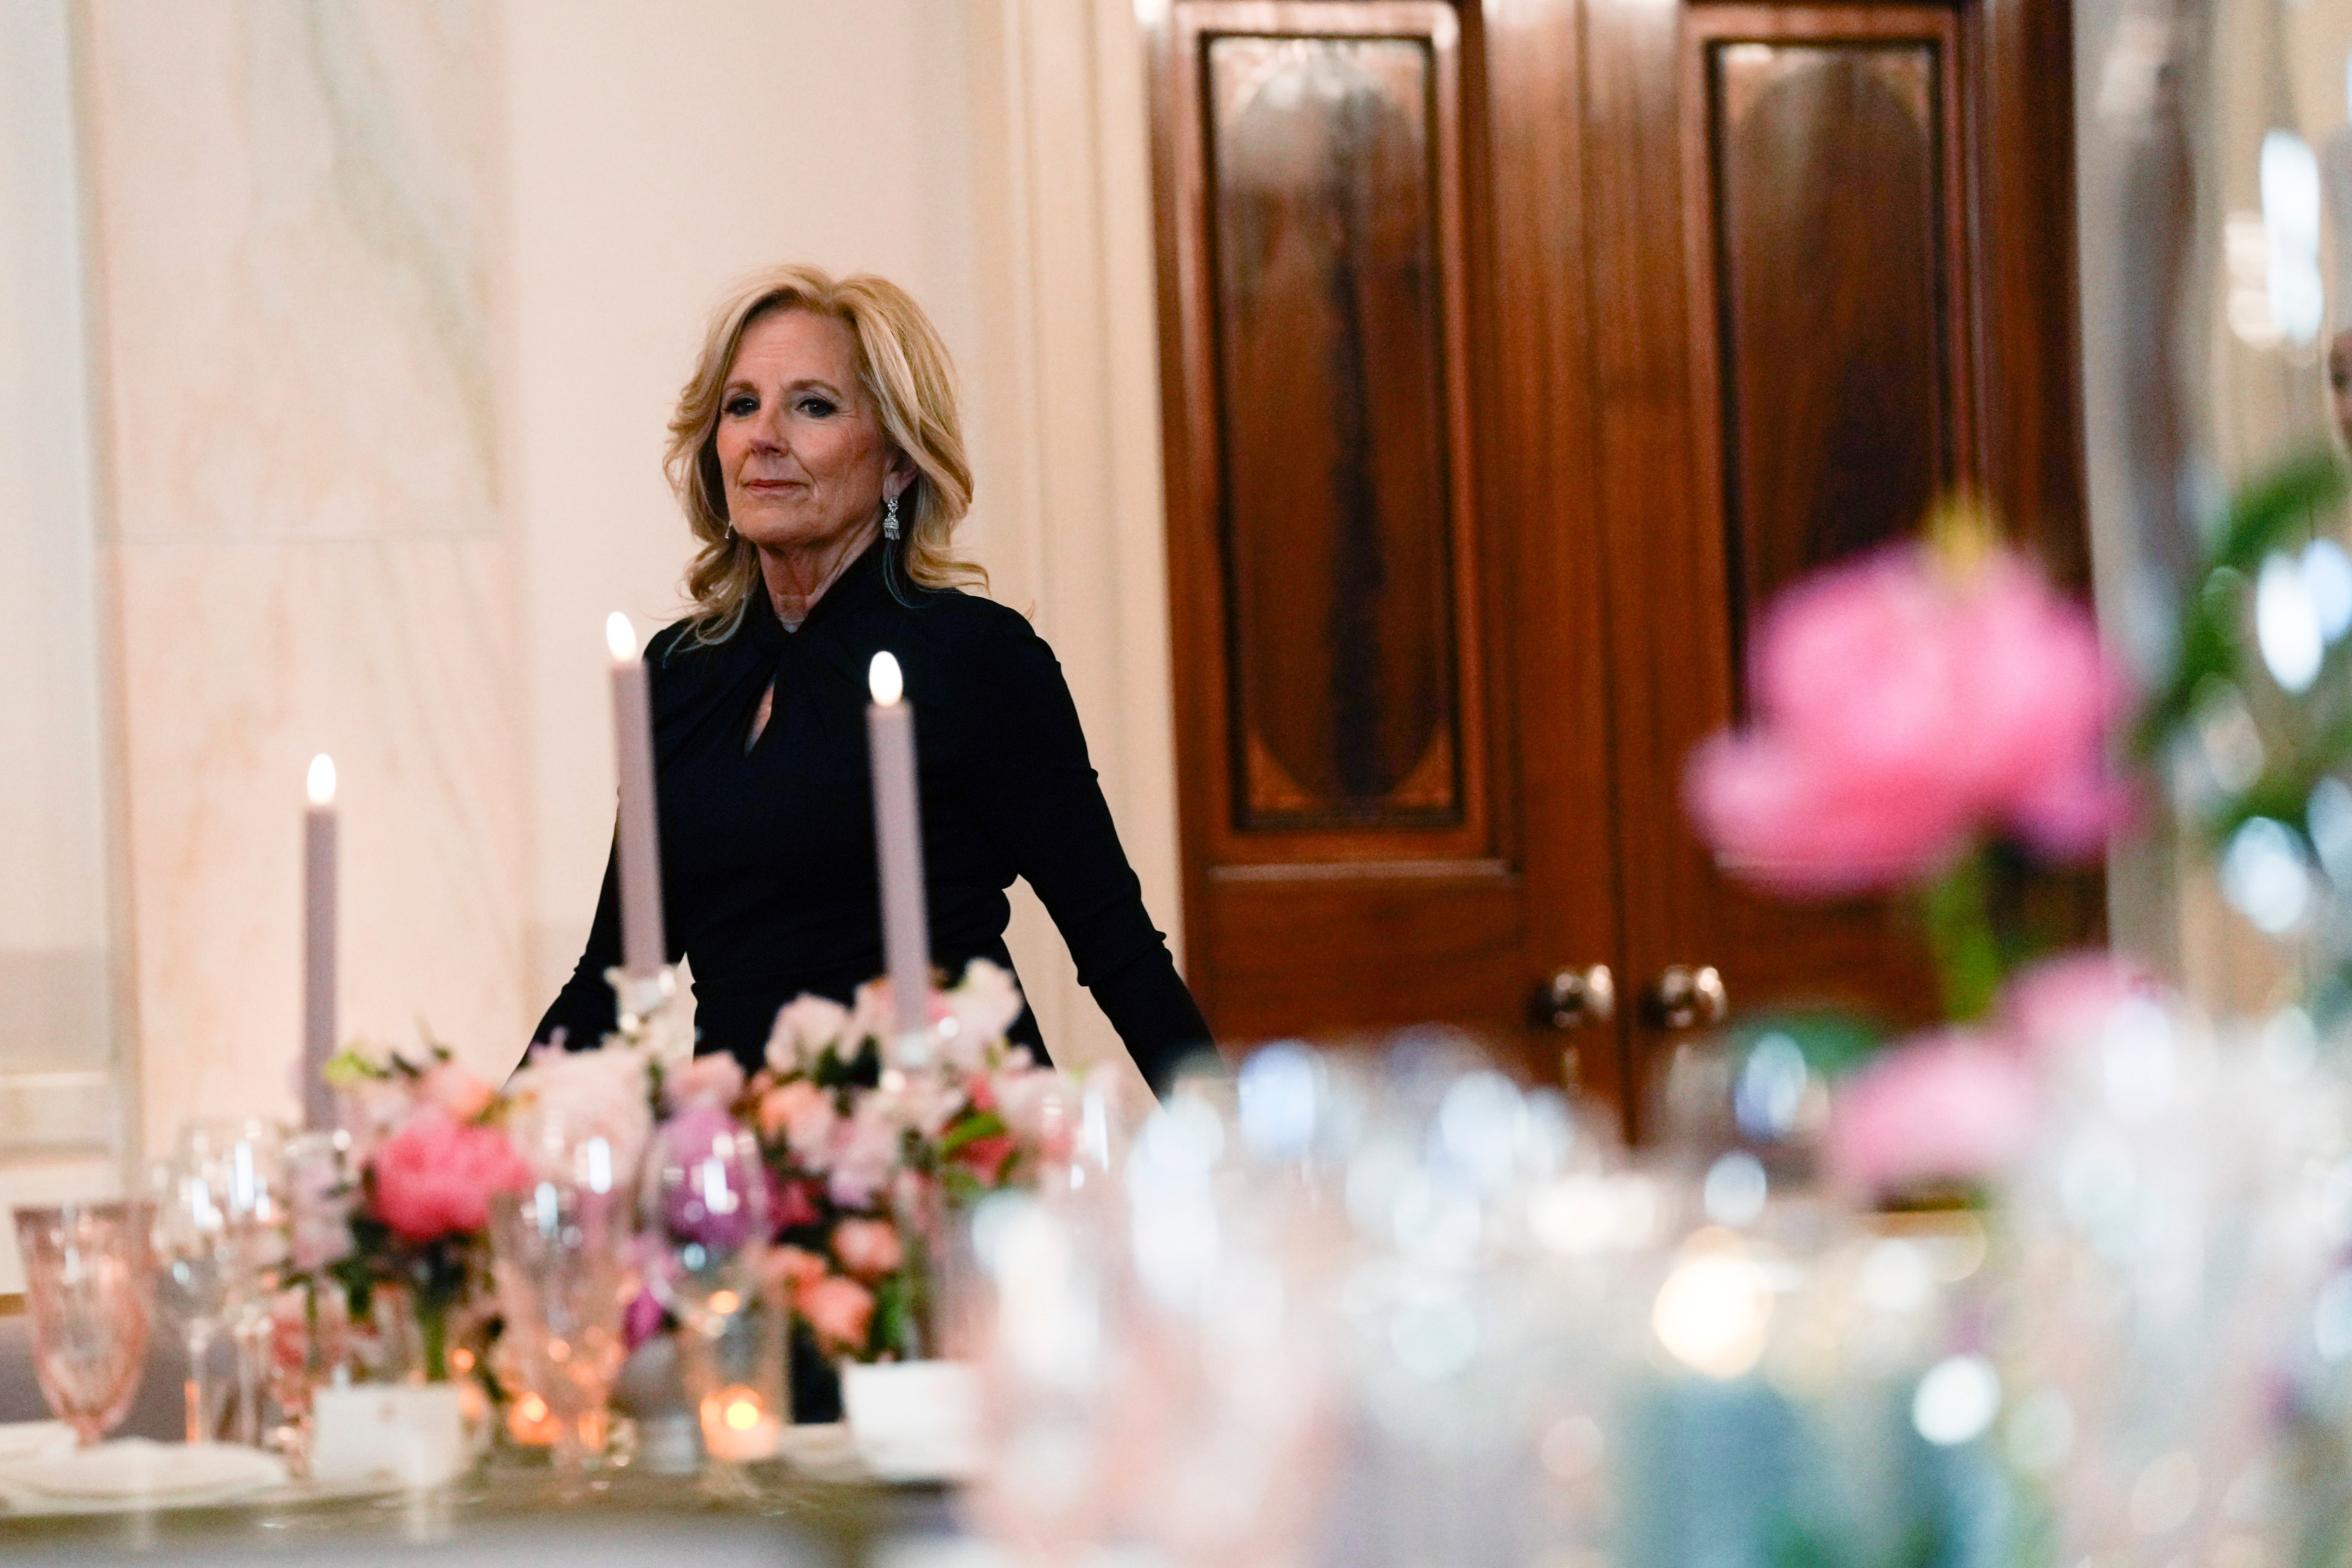 First lady Jill Biden arrives to speak before previewing the food and decorations at the White House in Washington